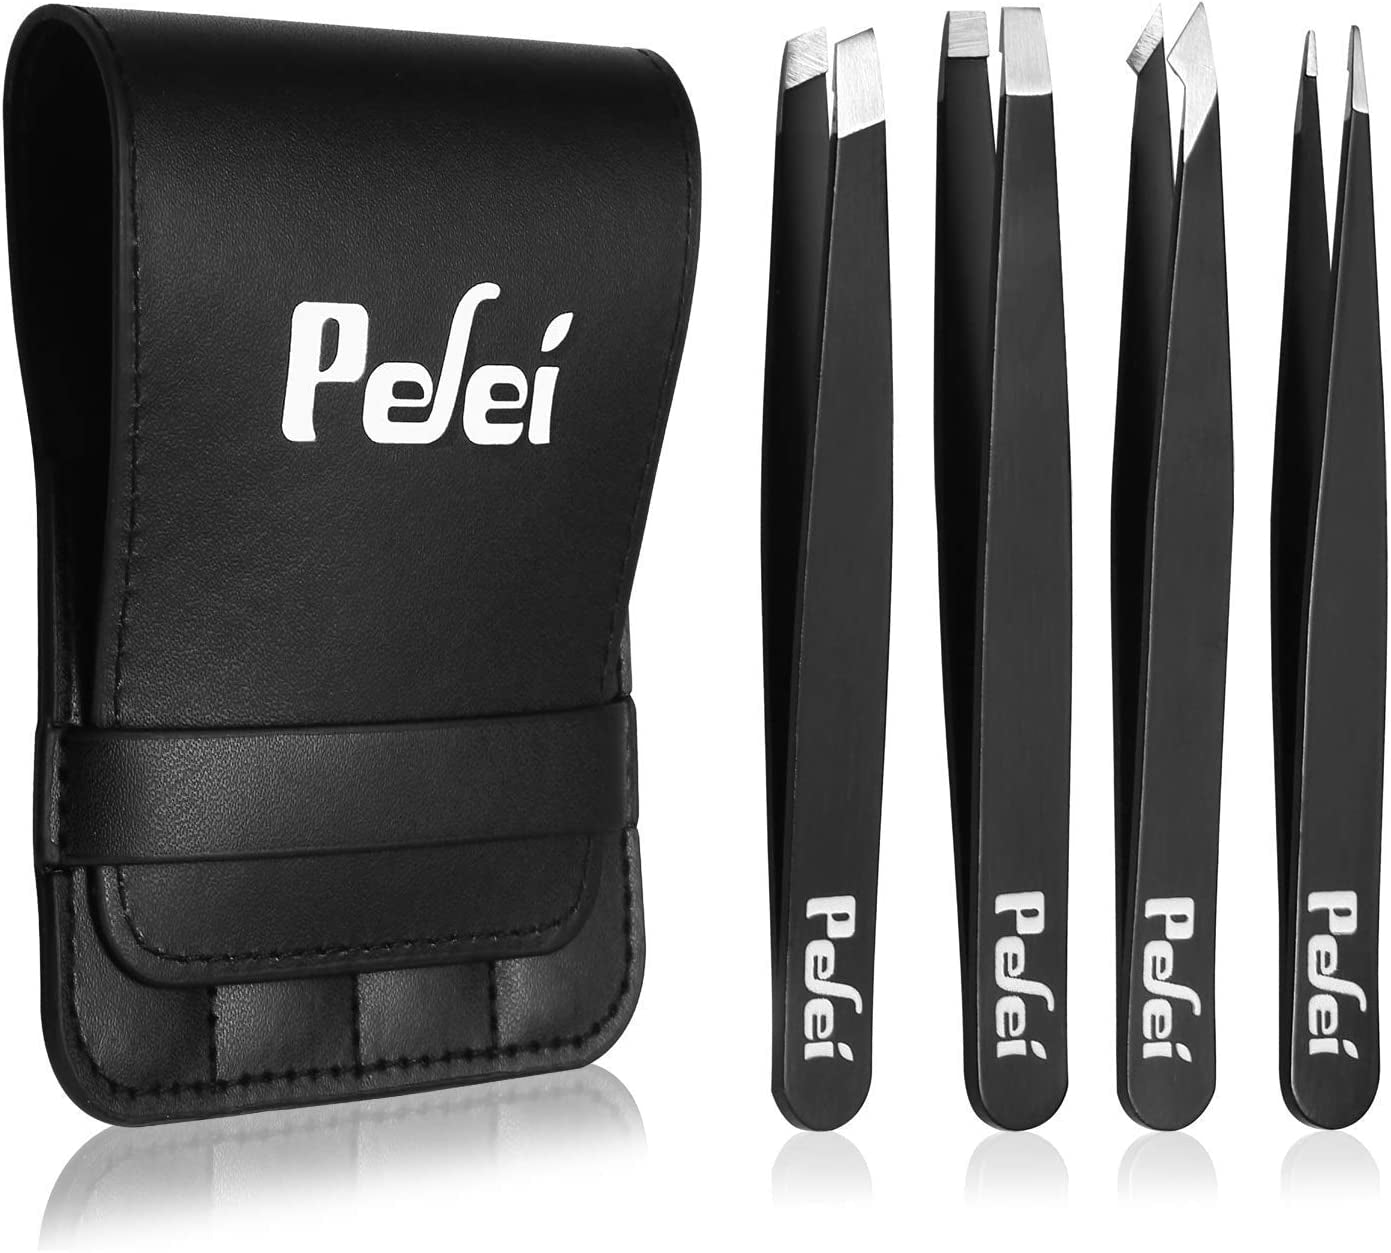 Tweezers Set - Professional Stainless Steel Tweezers for Eyebrows - Great Precision for Facial Hair, Splinter and Ingrown Hair Removal (Black)